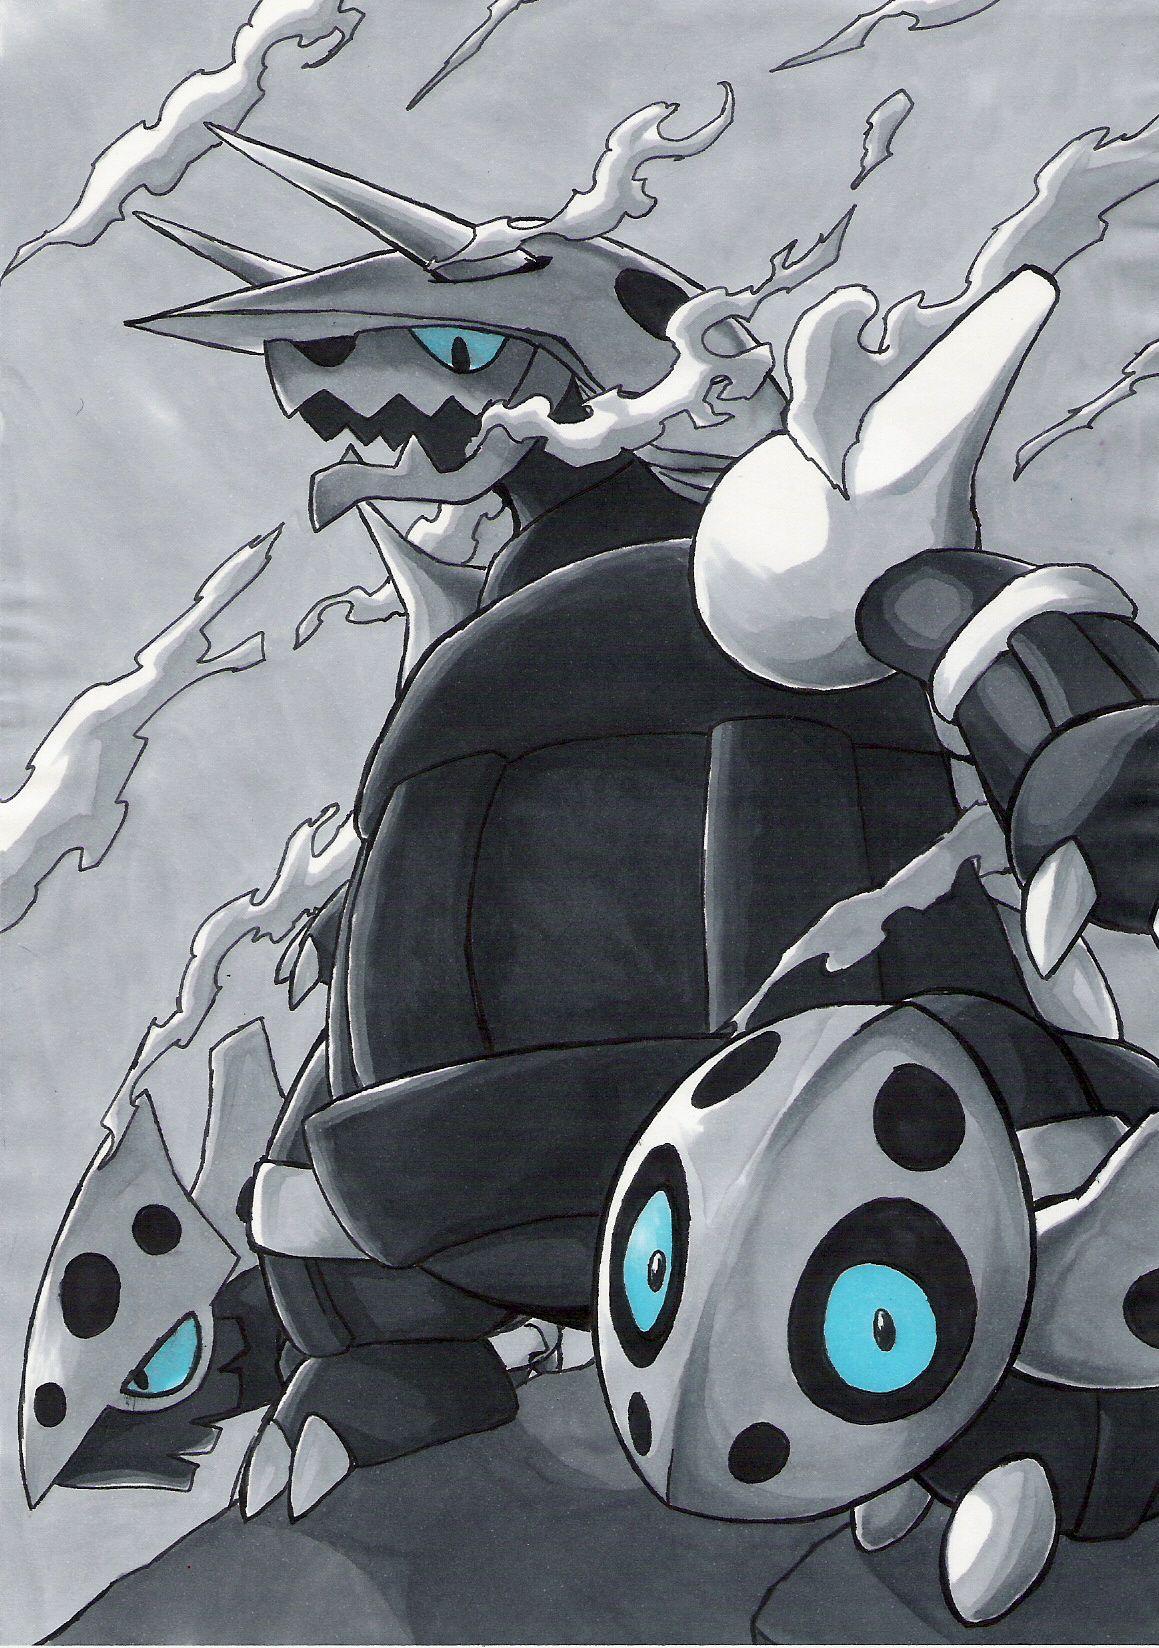 Steel type is composed of the most badass pokemon stats